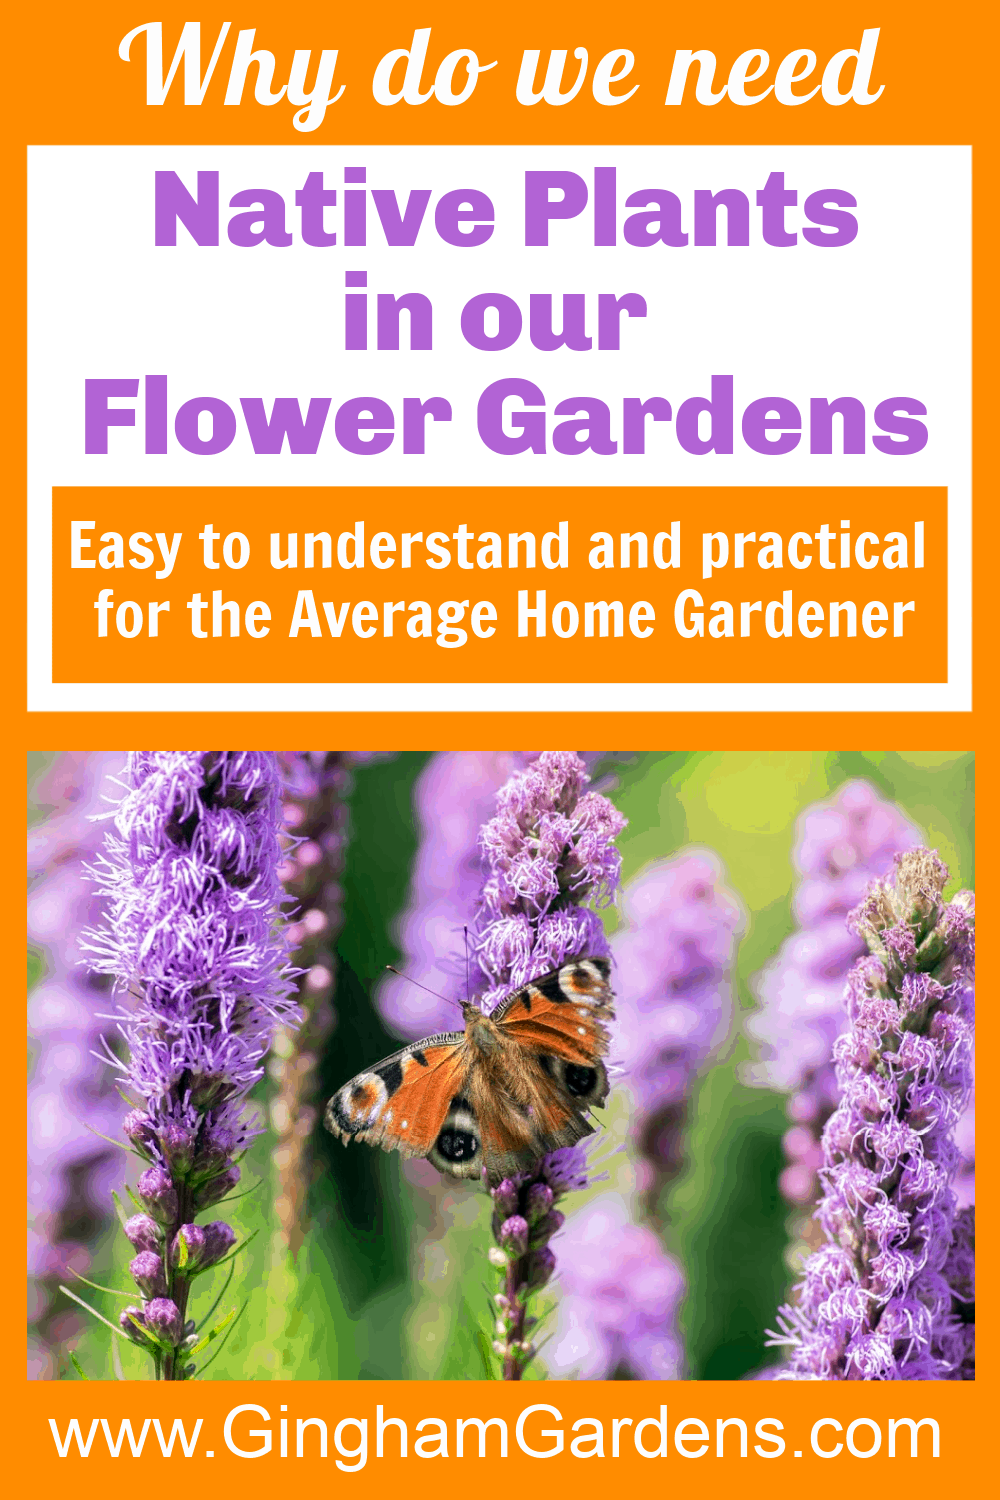 Image of Flowers and a butterfly with text overlay - Why do we need Native Plants in our Flower Gardens